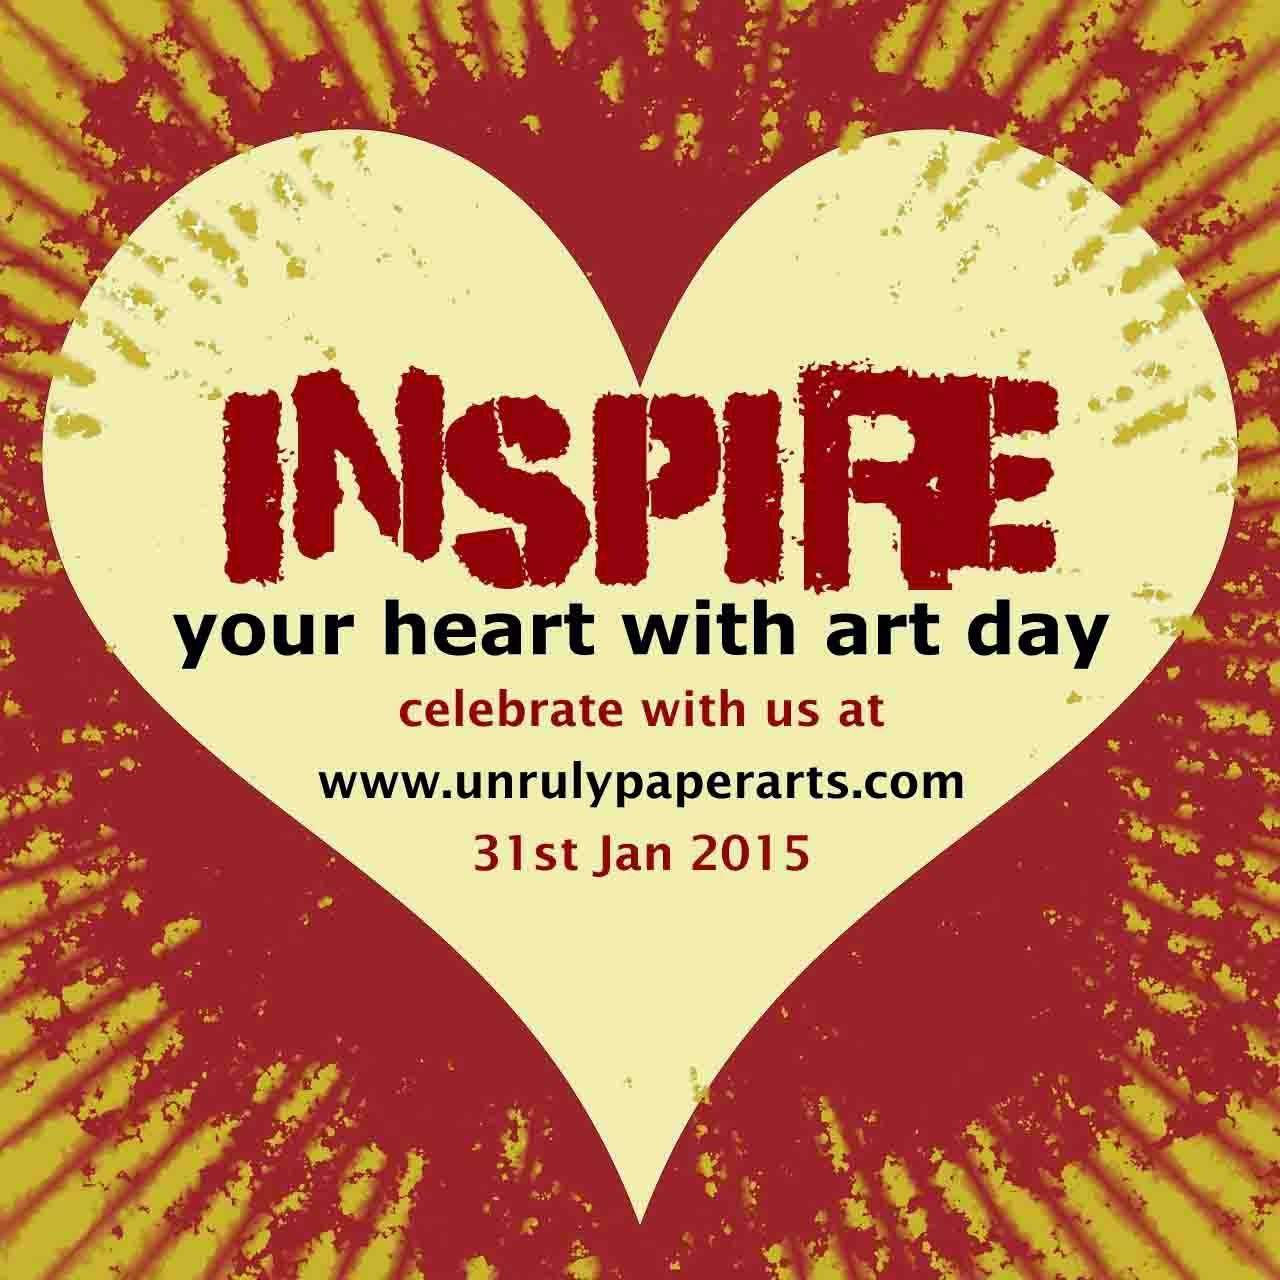 This is your heart. Inspire your Heart with Art. День вдохновения сердца искусством (inspire your Heart with Art Day). Art Day. With Heart.